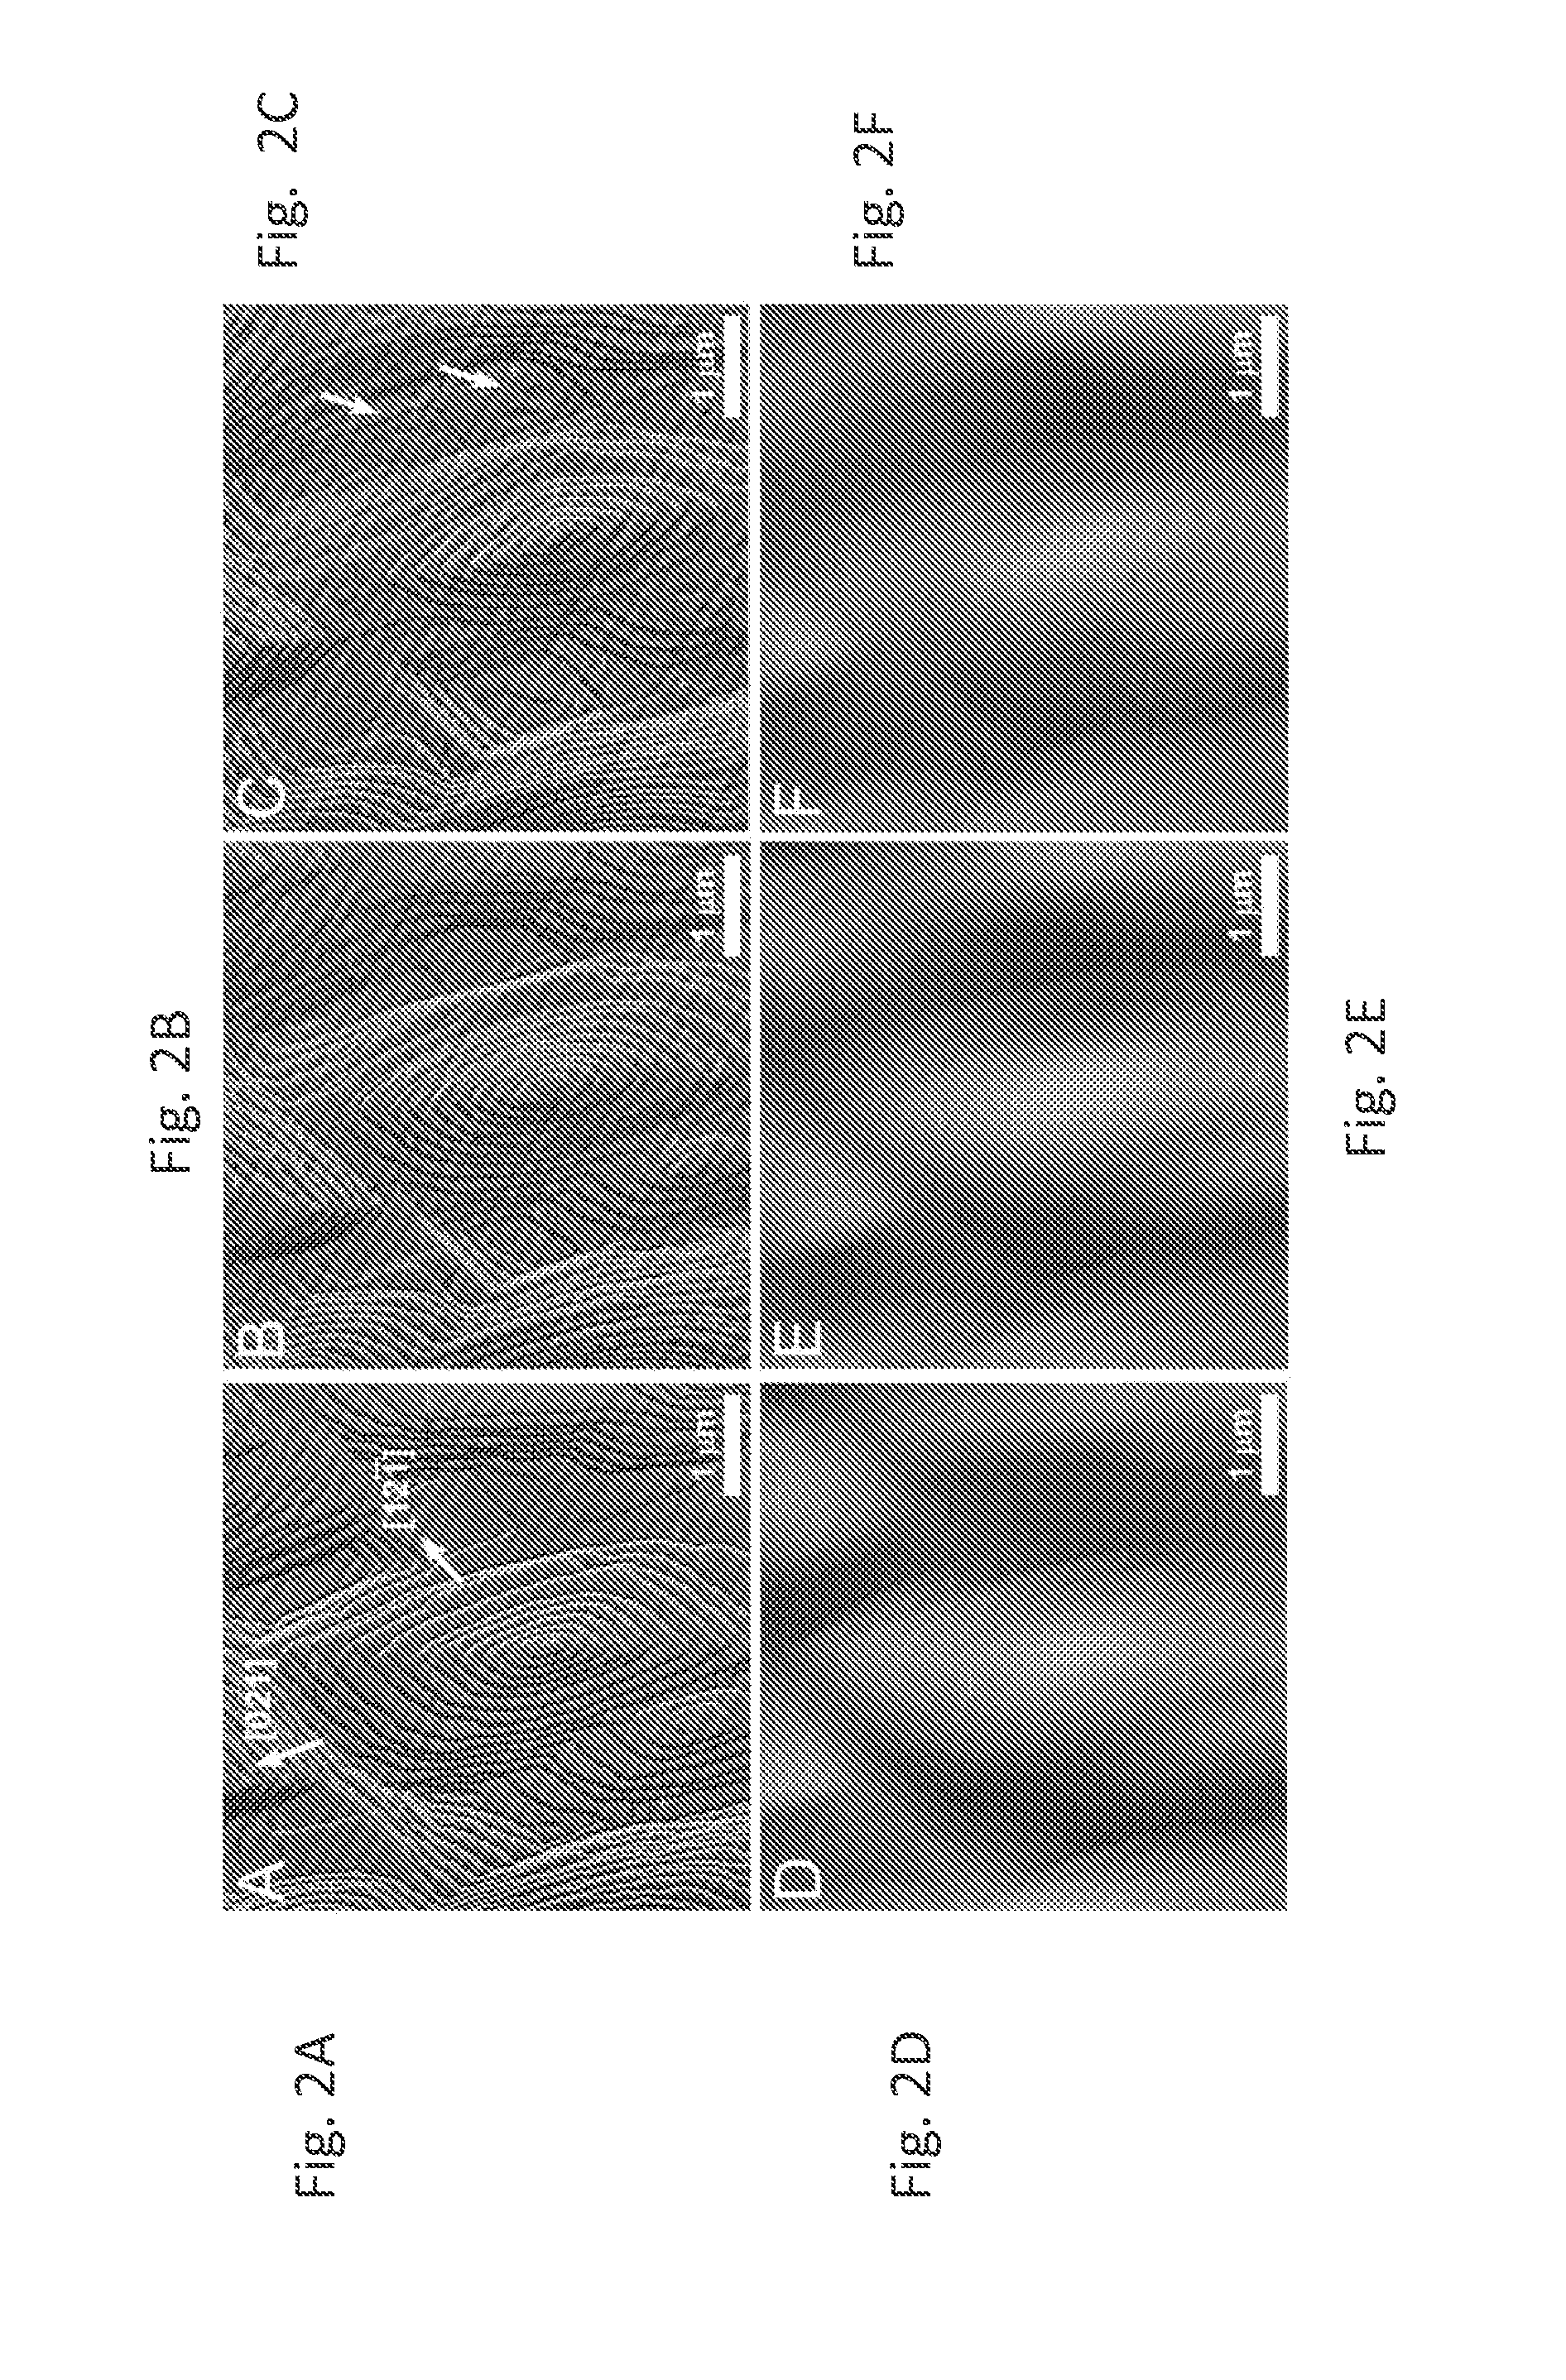 Organic acids as agents to dissolve calcium minerals in pathological calcification and uses thereof